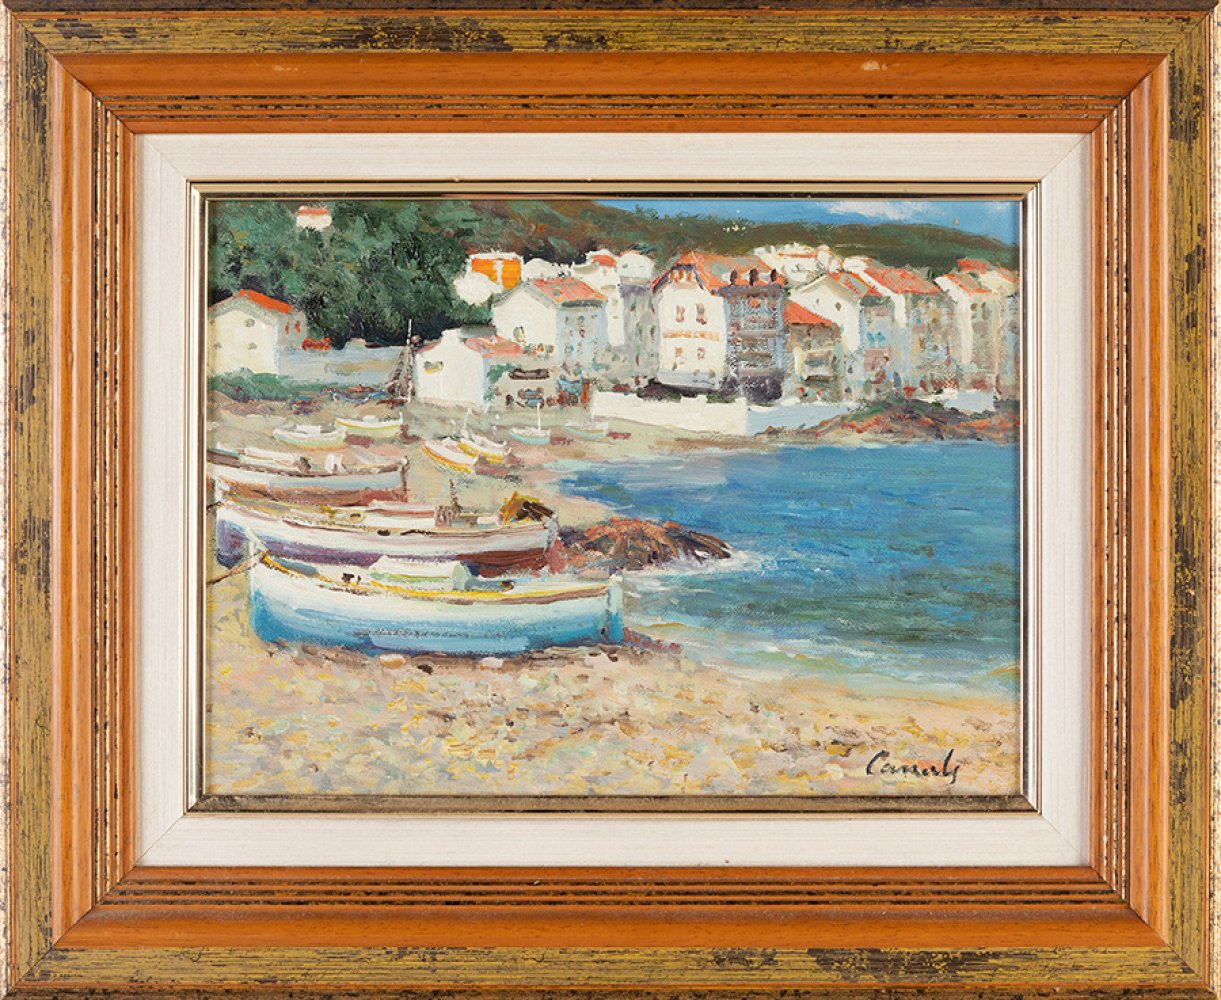 RICARD CANALS LLAMBÍ (Barcelona, 1876 - 1931)."Cadaqués, Costa Brava".Oil on canvas.Signed in the - Image 3 of 4